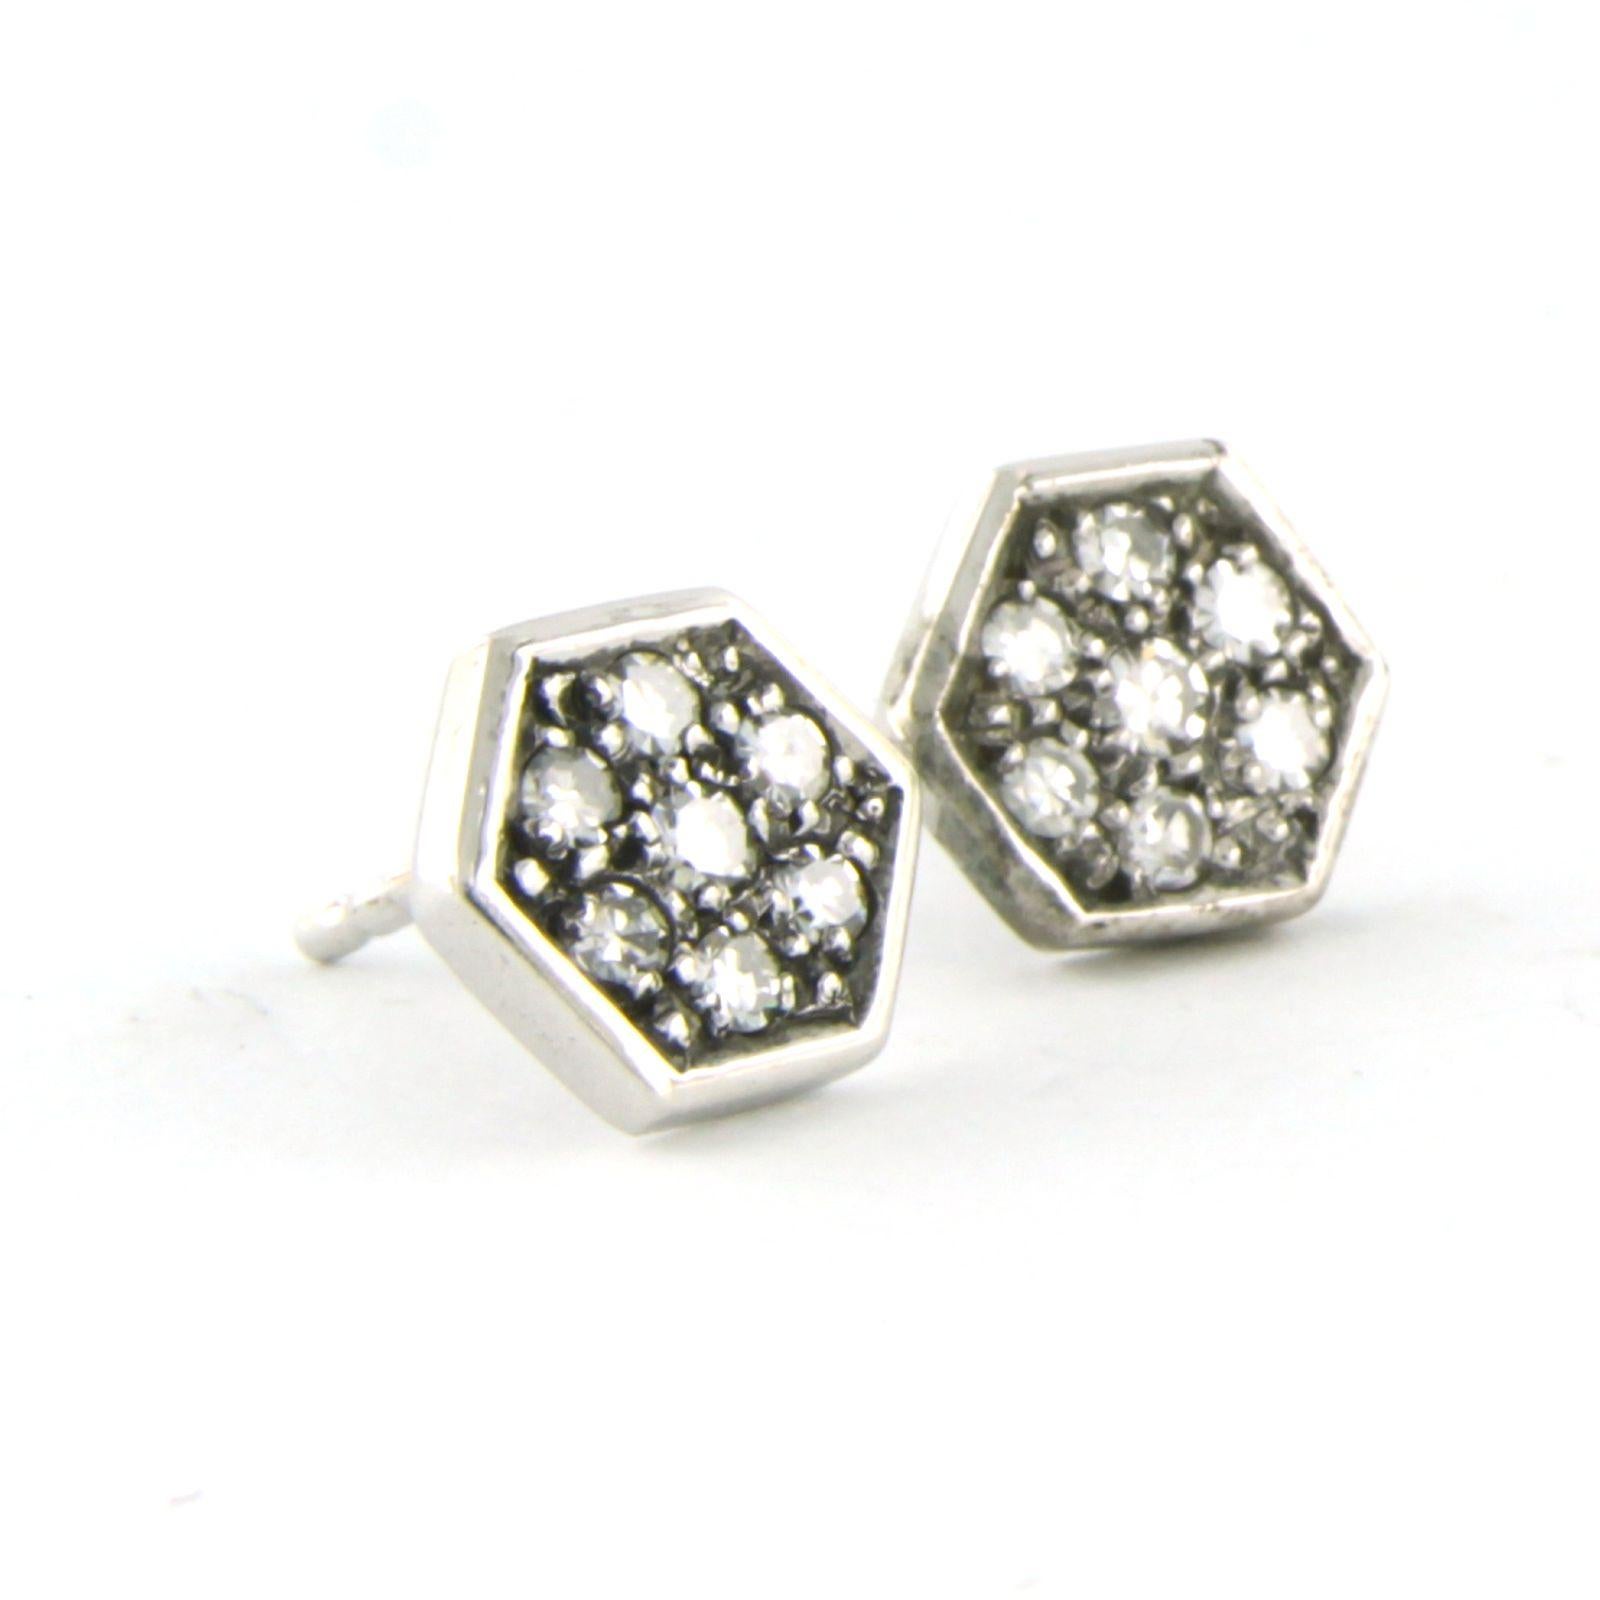 Earrings set with single cut diamonds up to 0.44ct 18k white gold In Excellent Condition For Sale In The Hague, ZH